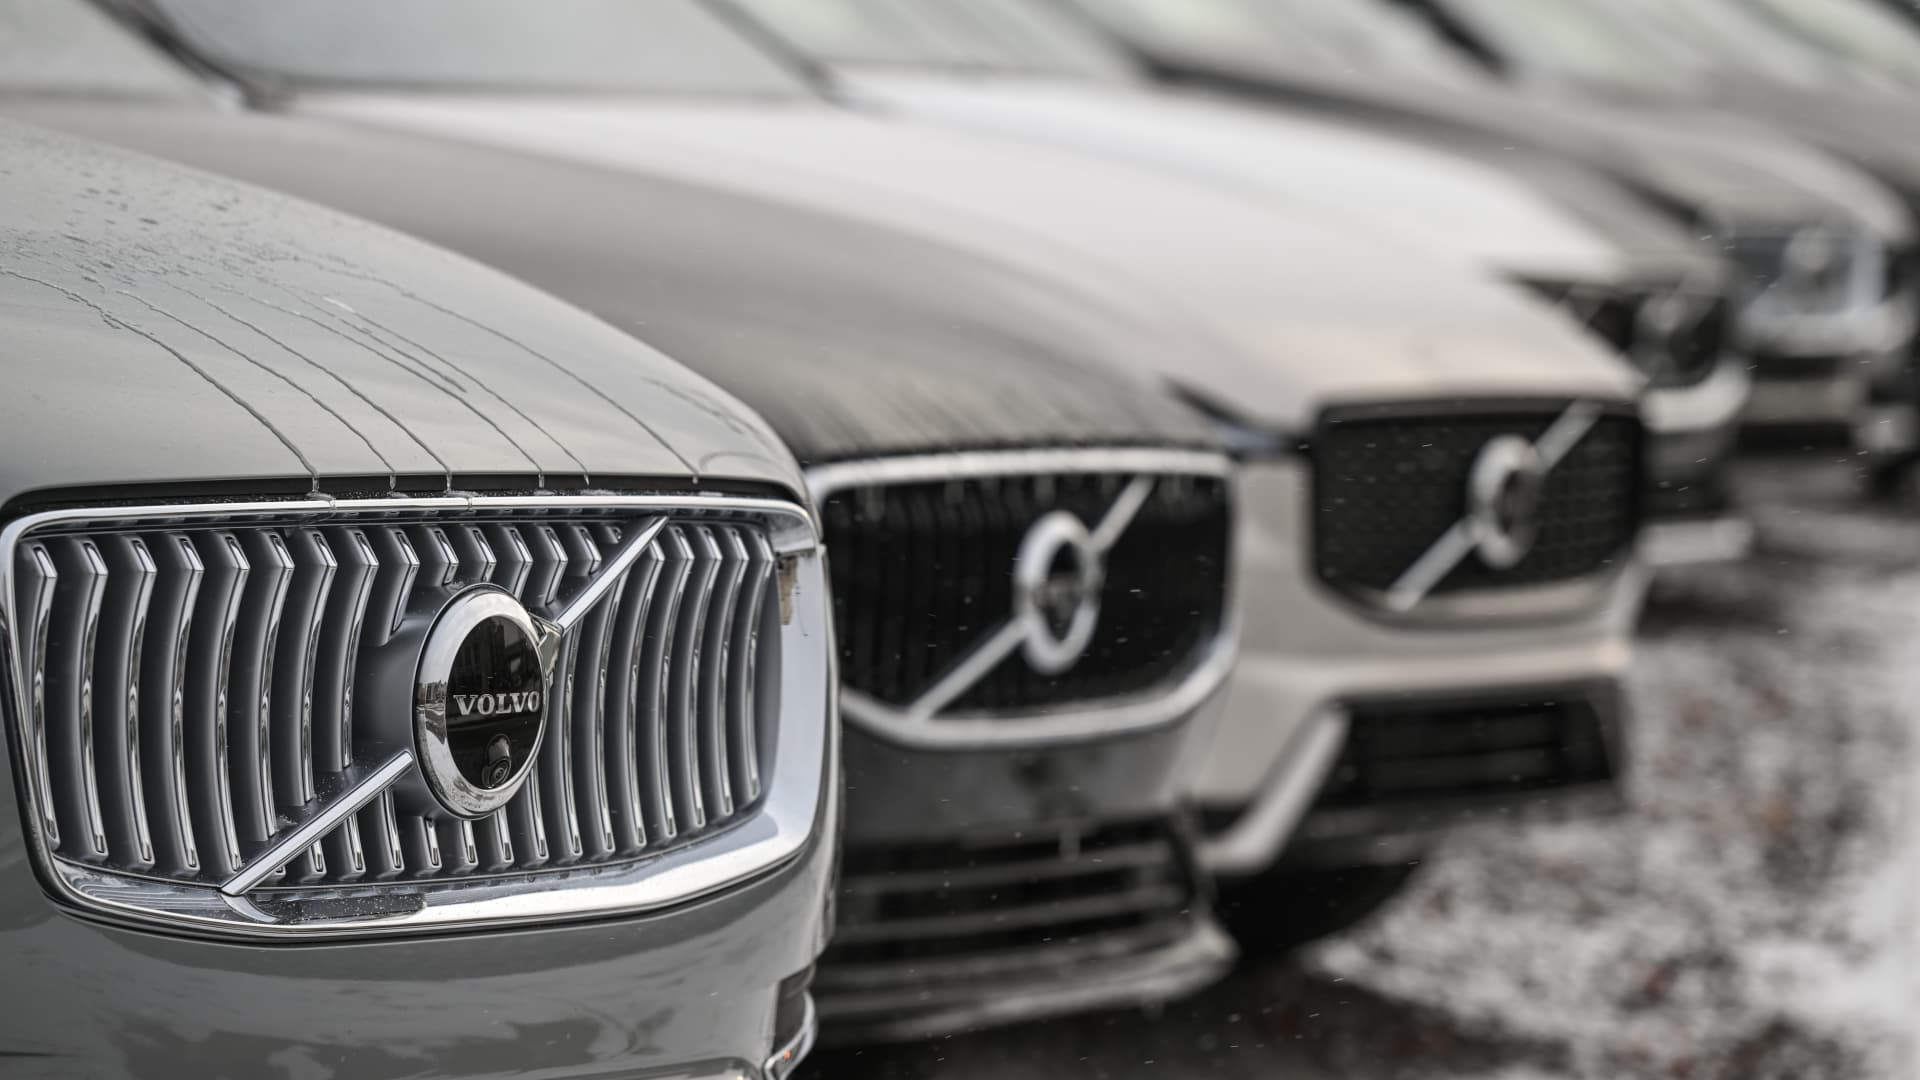 Volvo shares tumble 14% to report low as Chinese language proprietor Geely sells off inventory